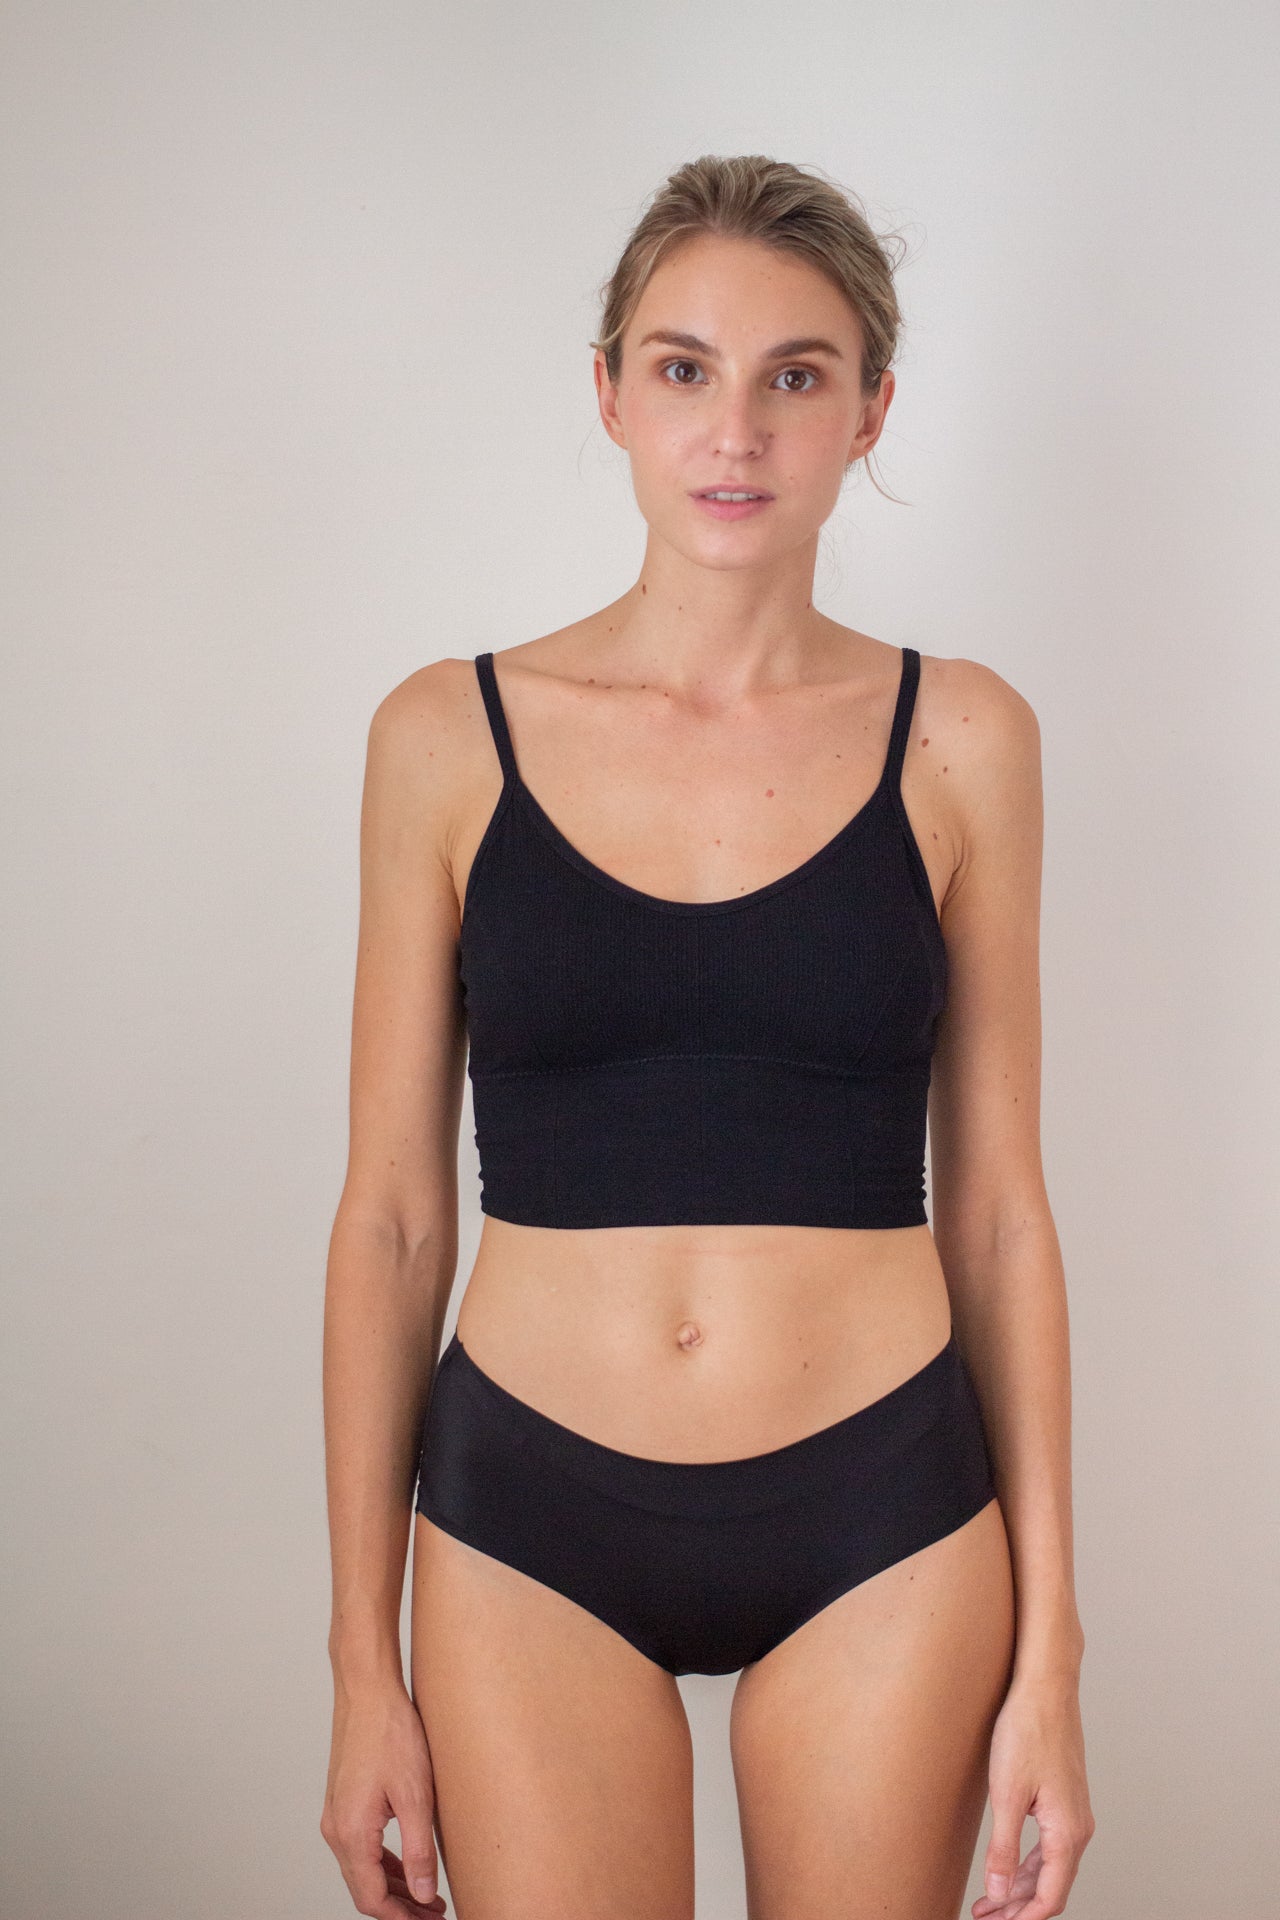 woman front facing wearing a black bralette